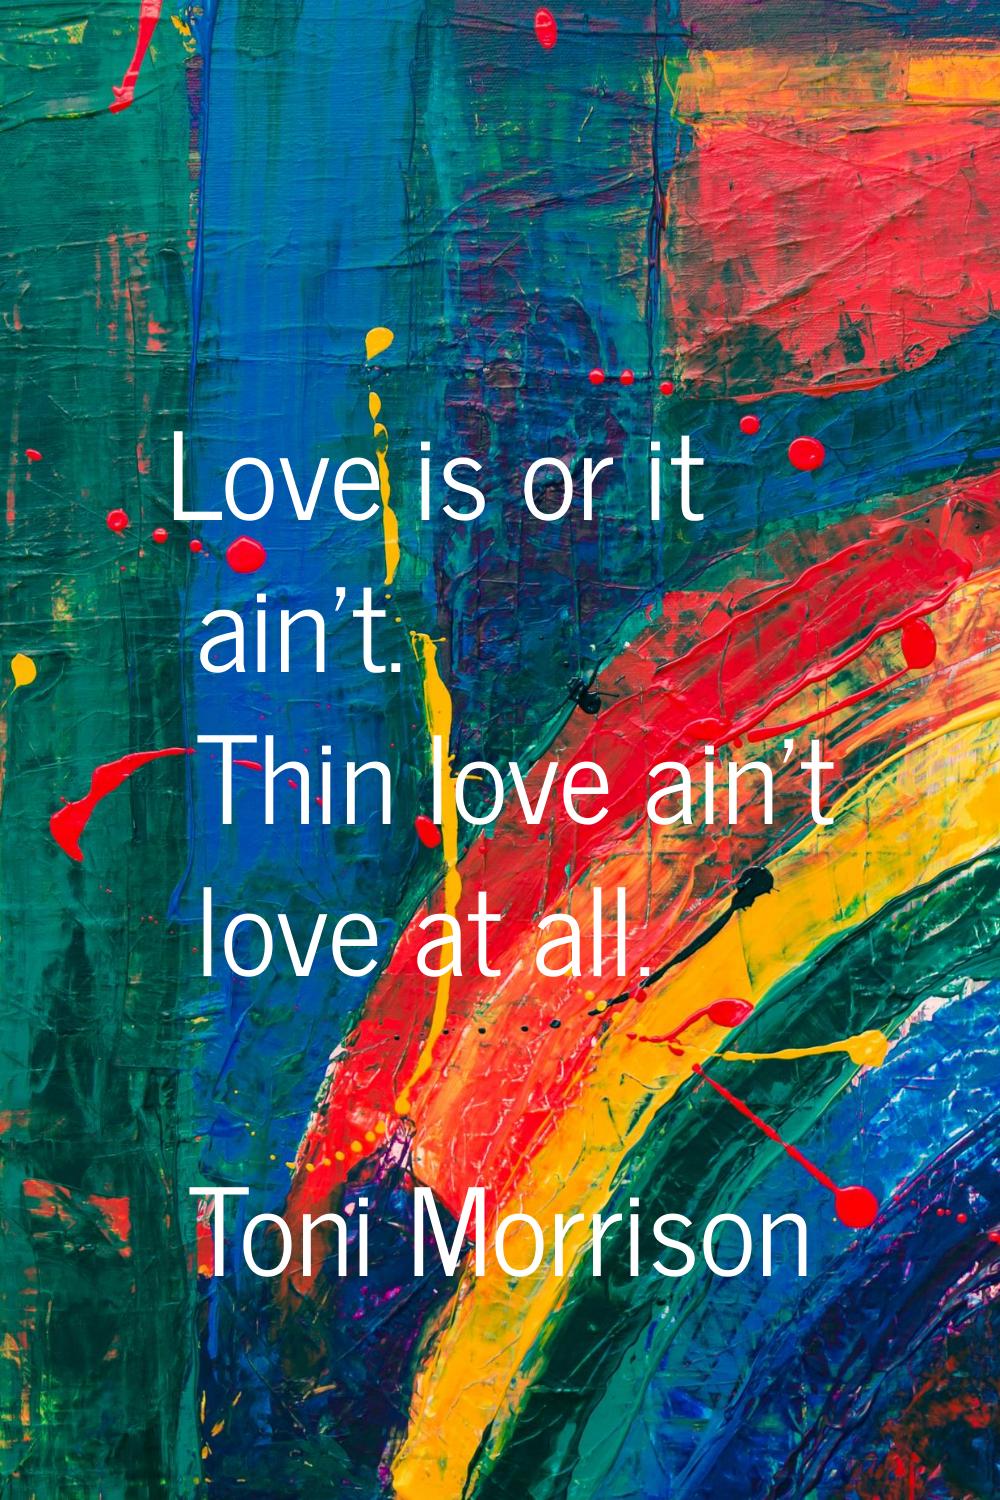 Love is or it ain't. Thin love ain't love at all.